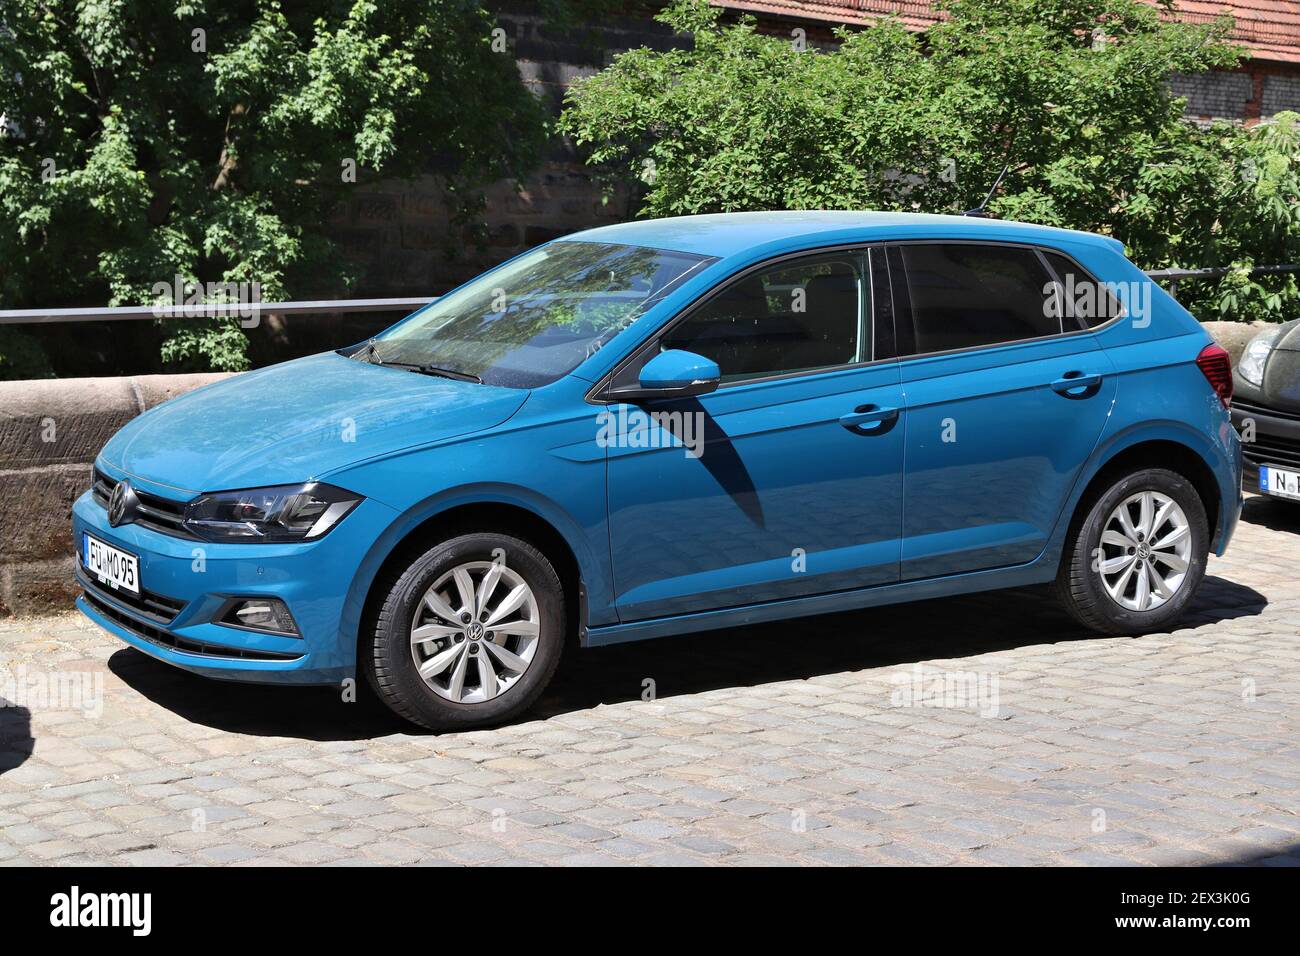 NUREMBERG, GERMANY - MAY 7, 2018: VW Polo economy compact car parked in  Germany. There were 45.8 million cars registered in Germany (as of 2017  Stock Photo - Alamy